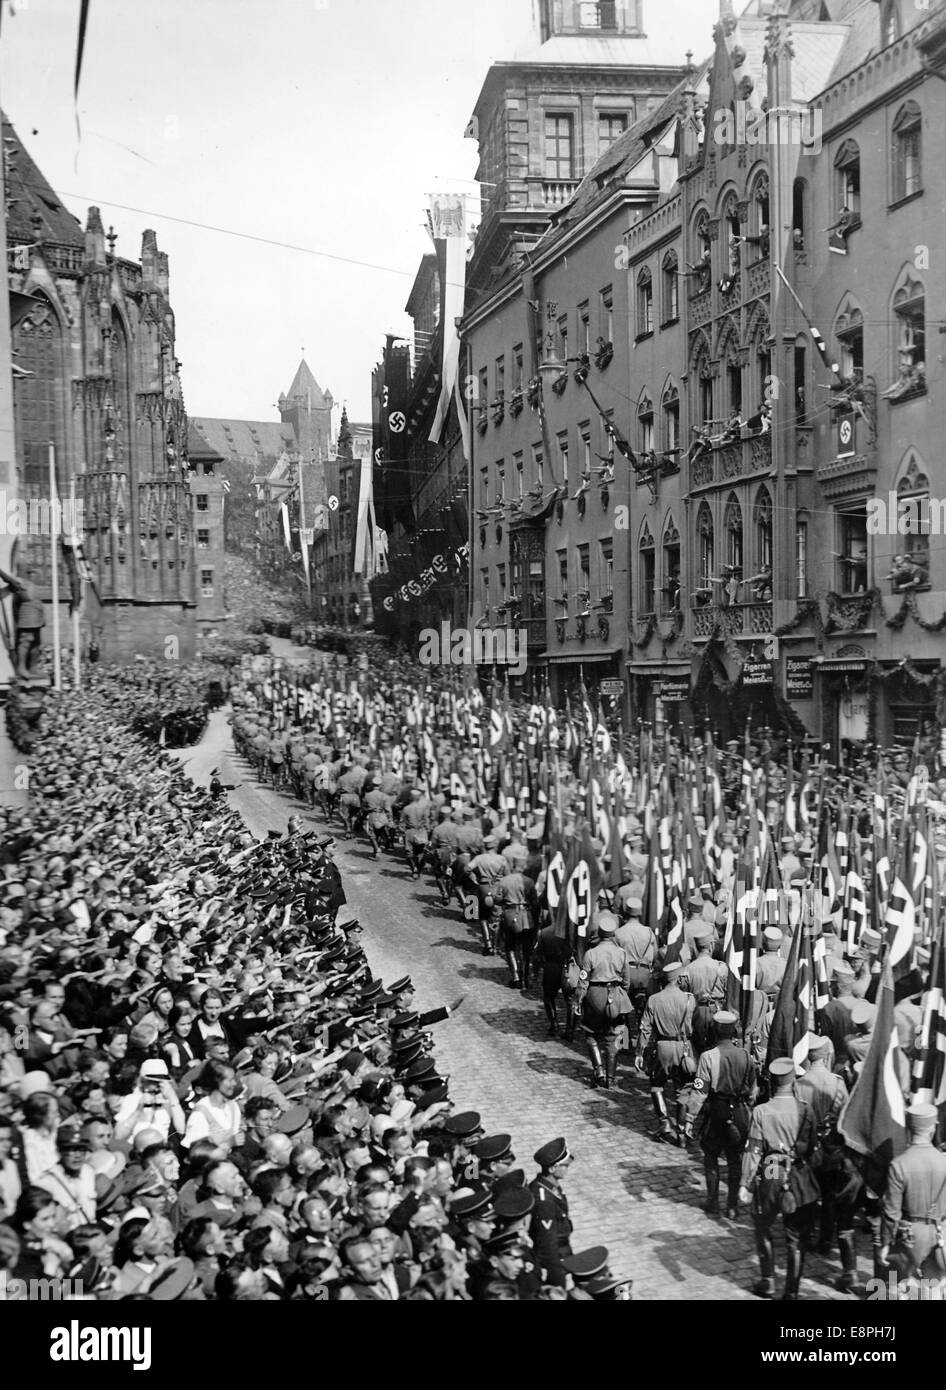 Nuremberg Rally 1936 in Nuremberg, Germany - Members of the Sturmabteilung (SA) march through the streets of the city. (Flaws in quality due to the historic picture copy) Fotoarchiv für Zeitgeschichtee - NO WIRE SERVICE - Stock Photo